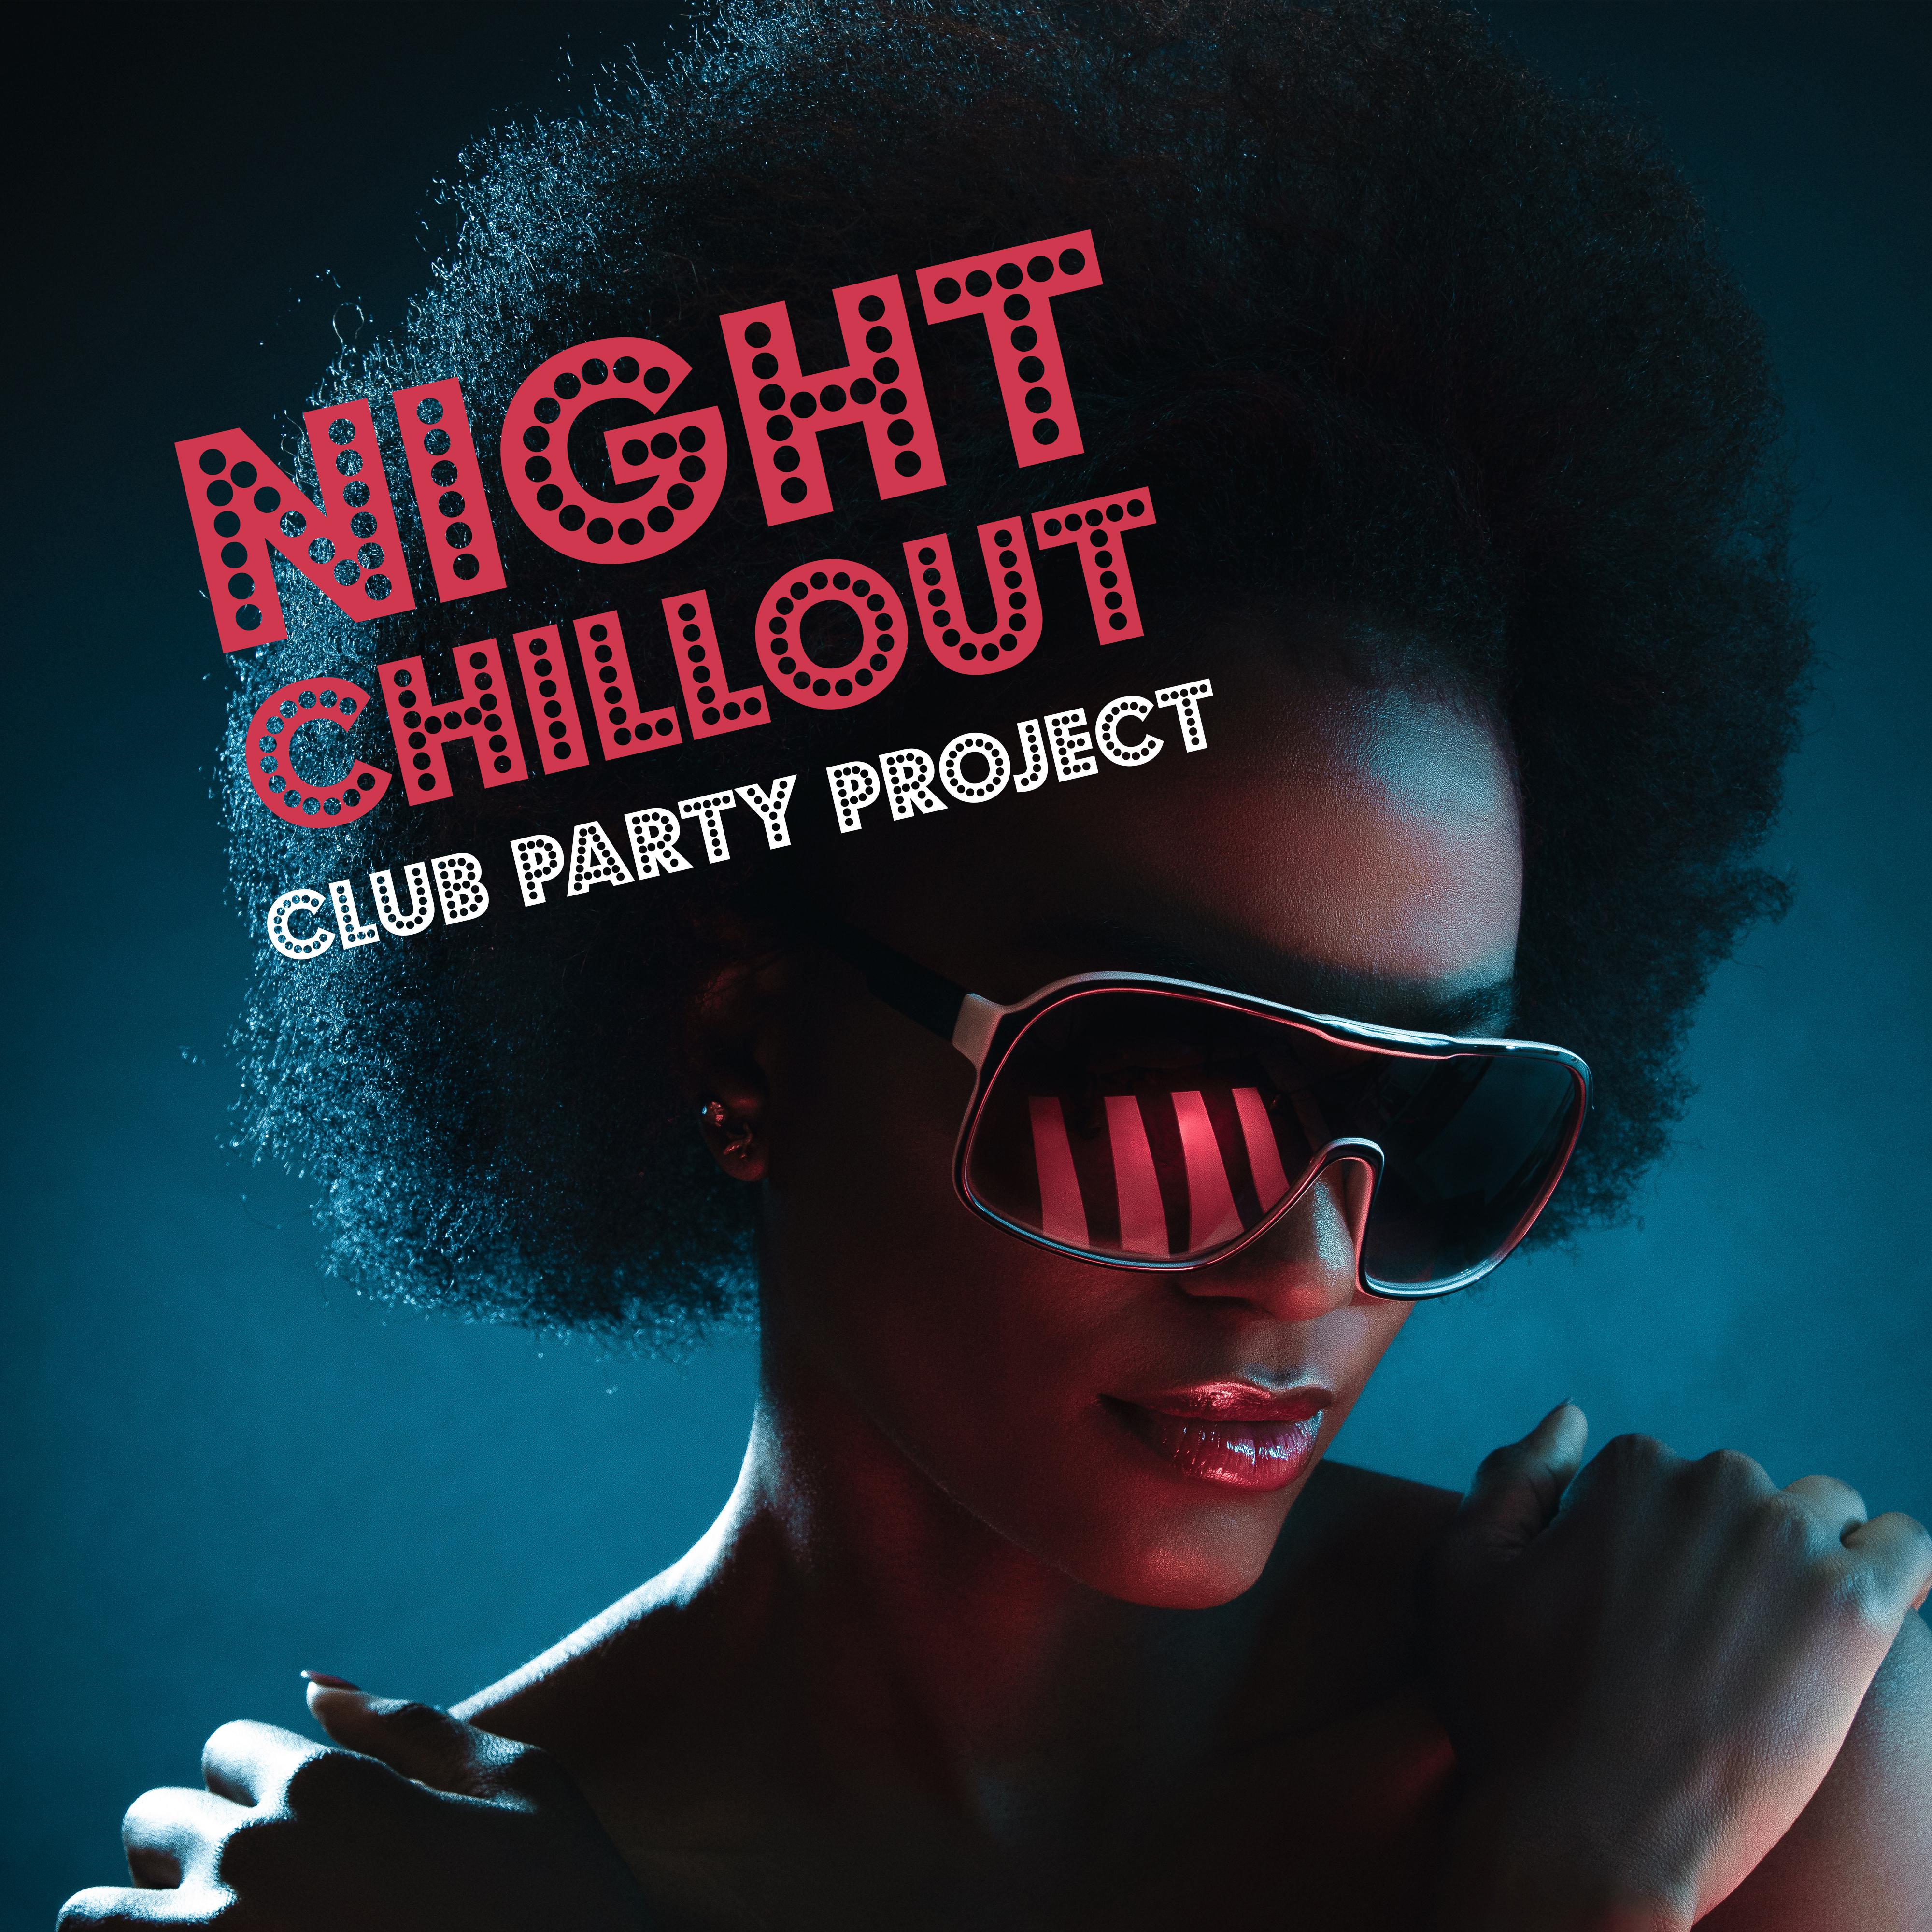 Night Chillout Club Party Project: 2019 Dynamic Chill Out Electronic Music, Pumping Beats & Good Vibes for All Night Long Dance Party